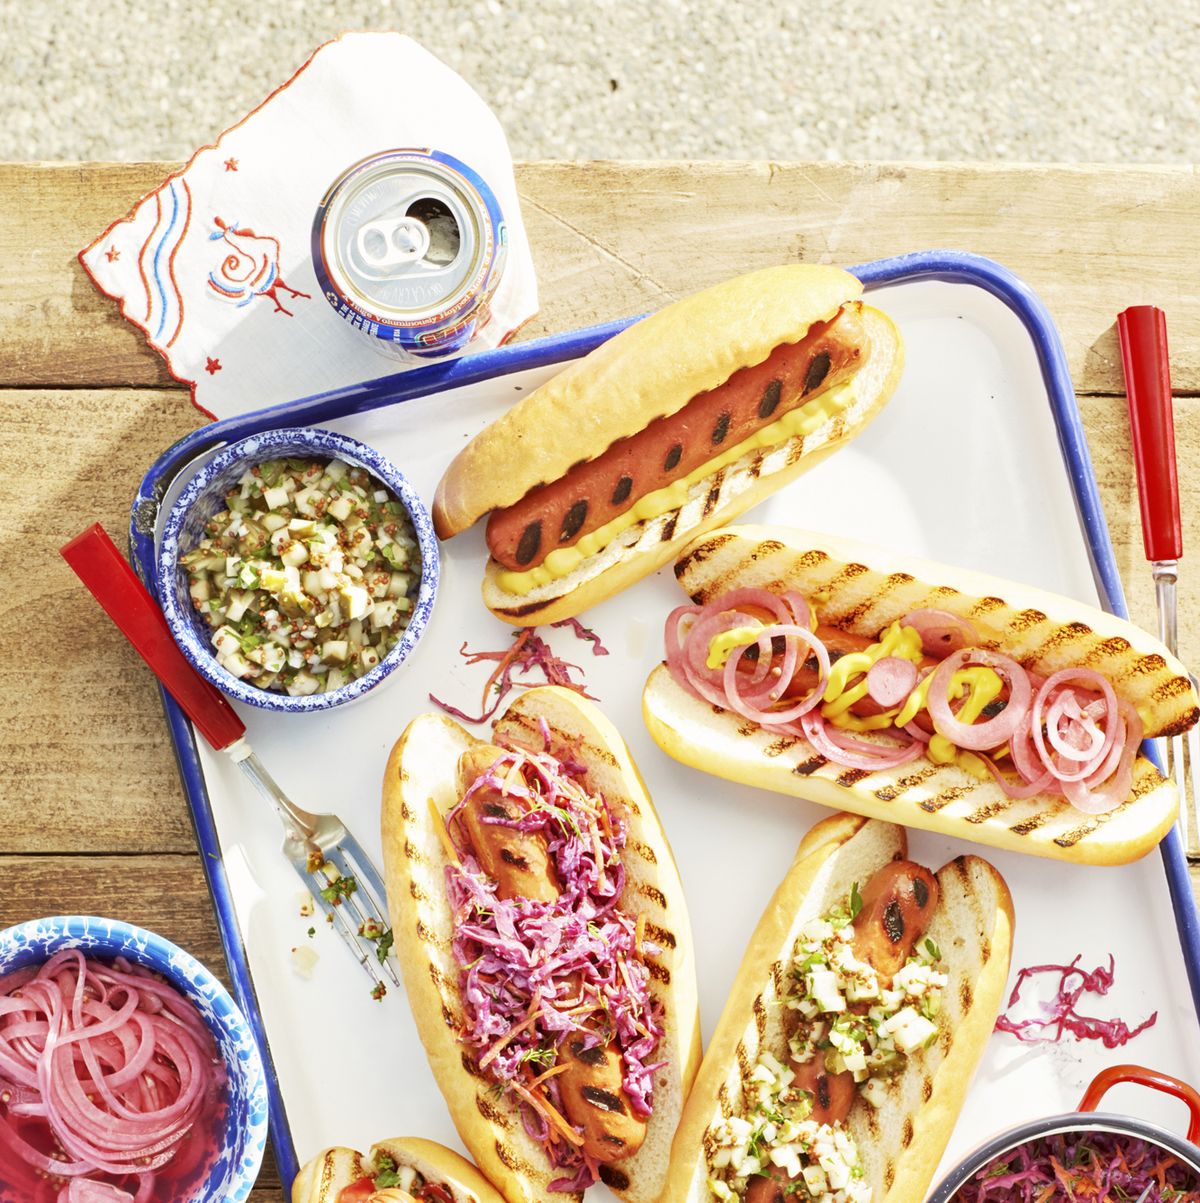 Best Hot Dog Toppings — Simple Hot Dog Toppings